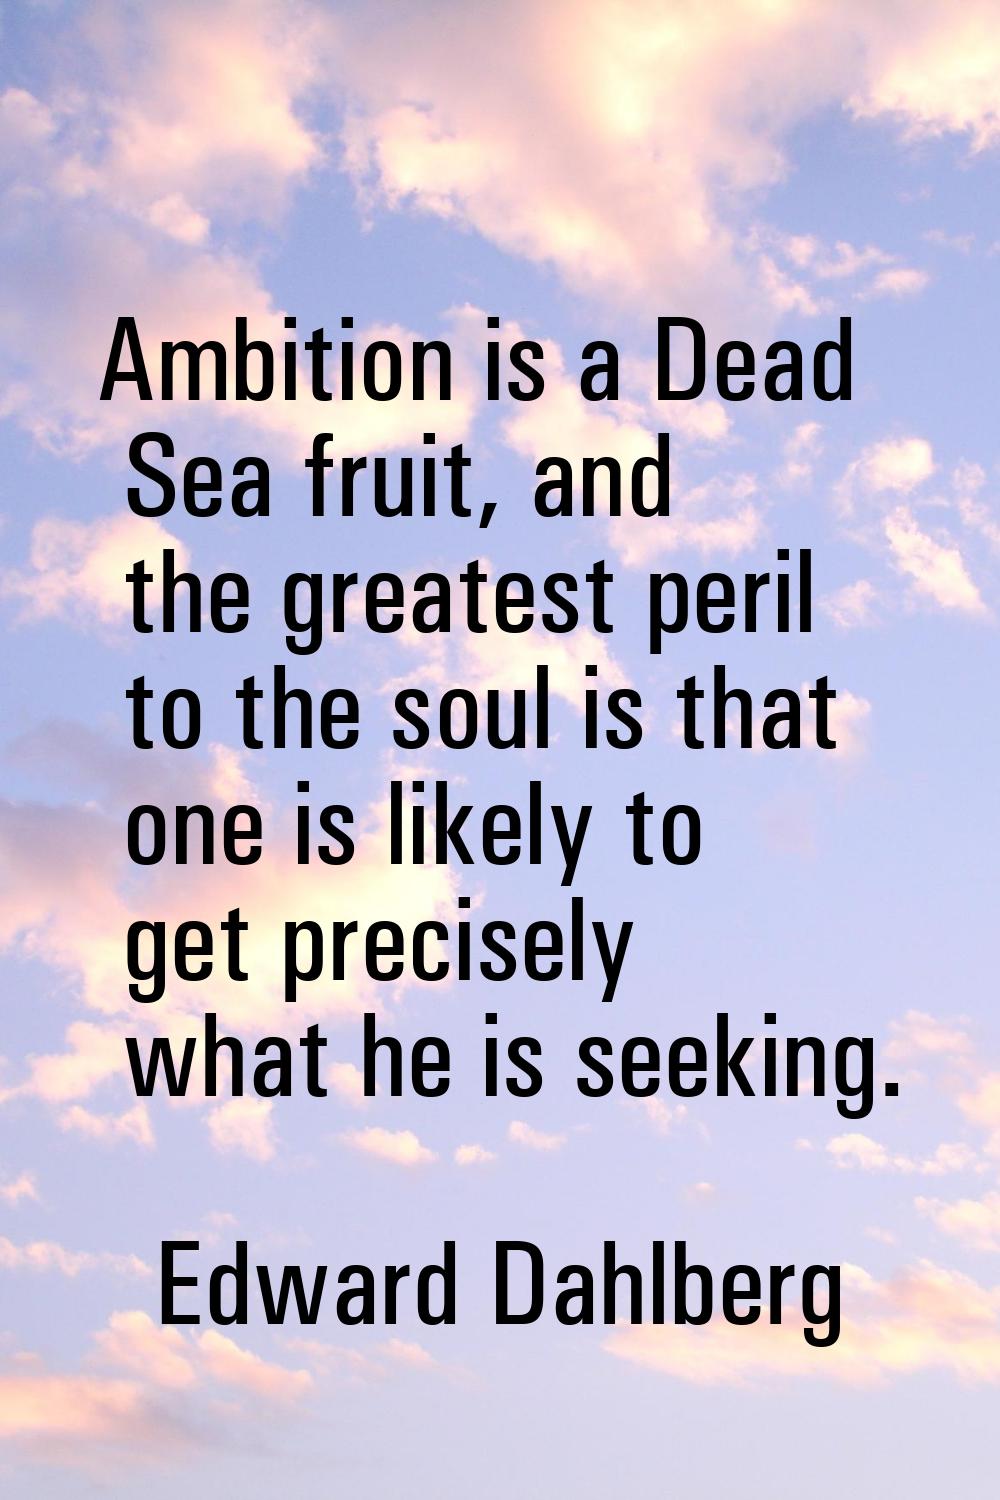 Ambition is a Dead Sea fruit, and the greatest peril to the soul is that one is likely to get preci